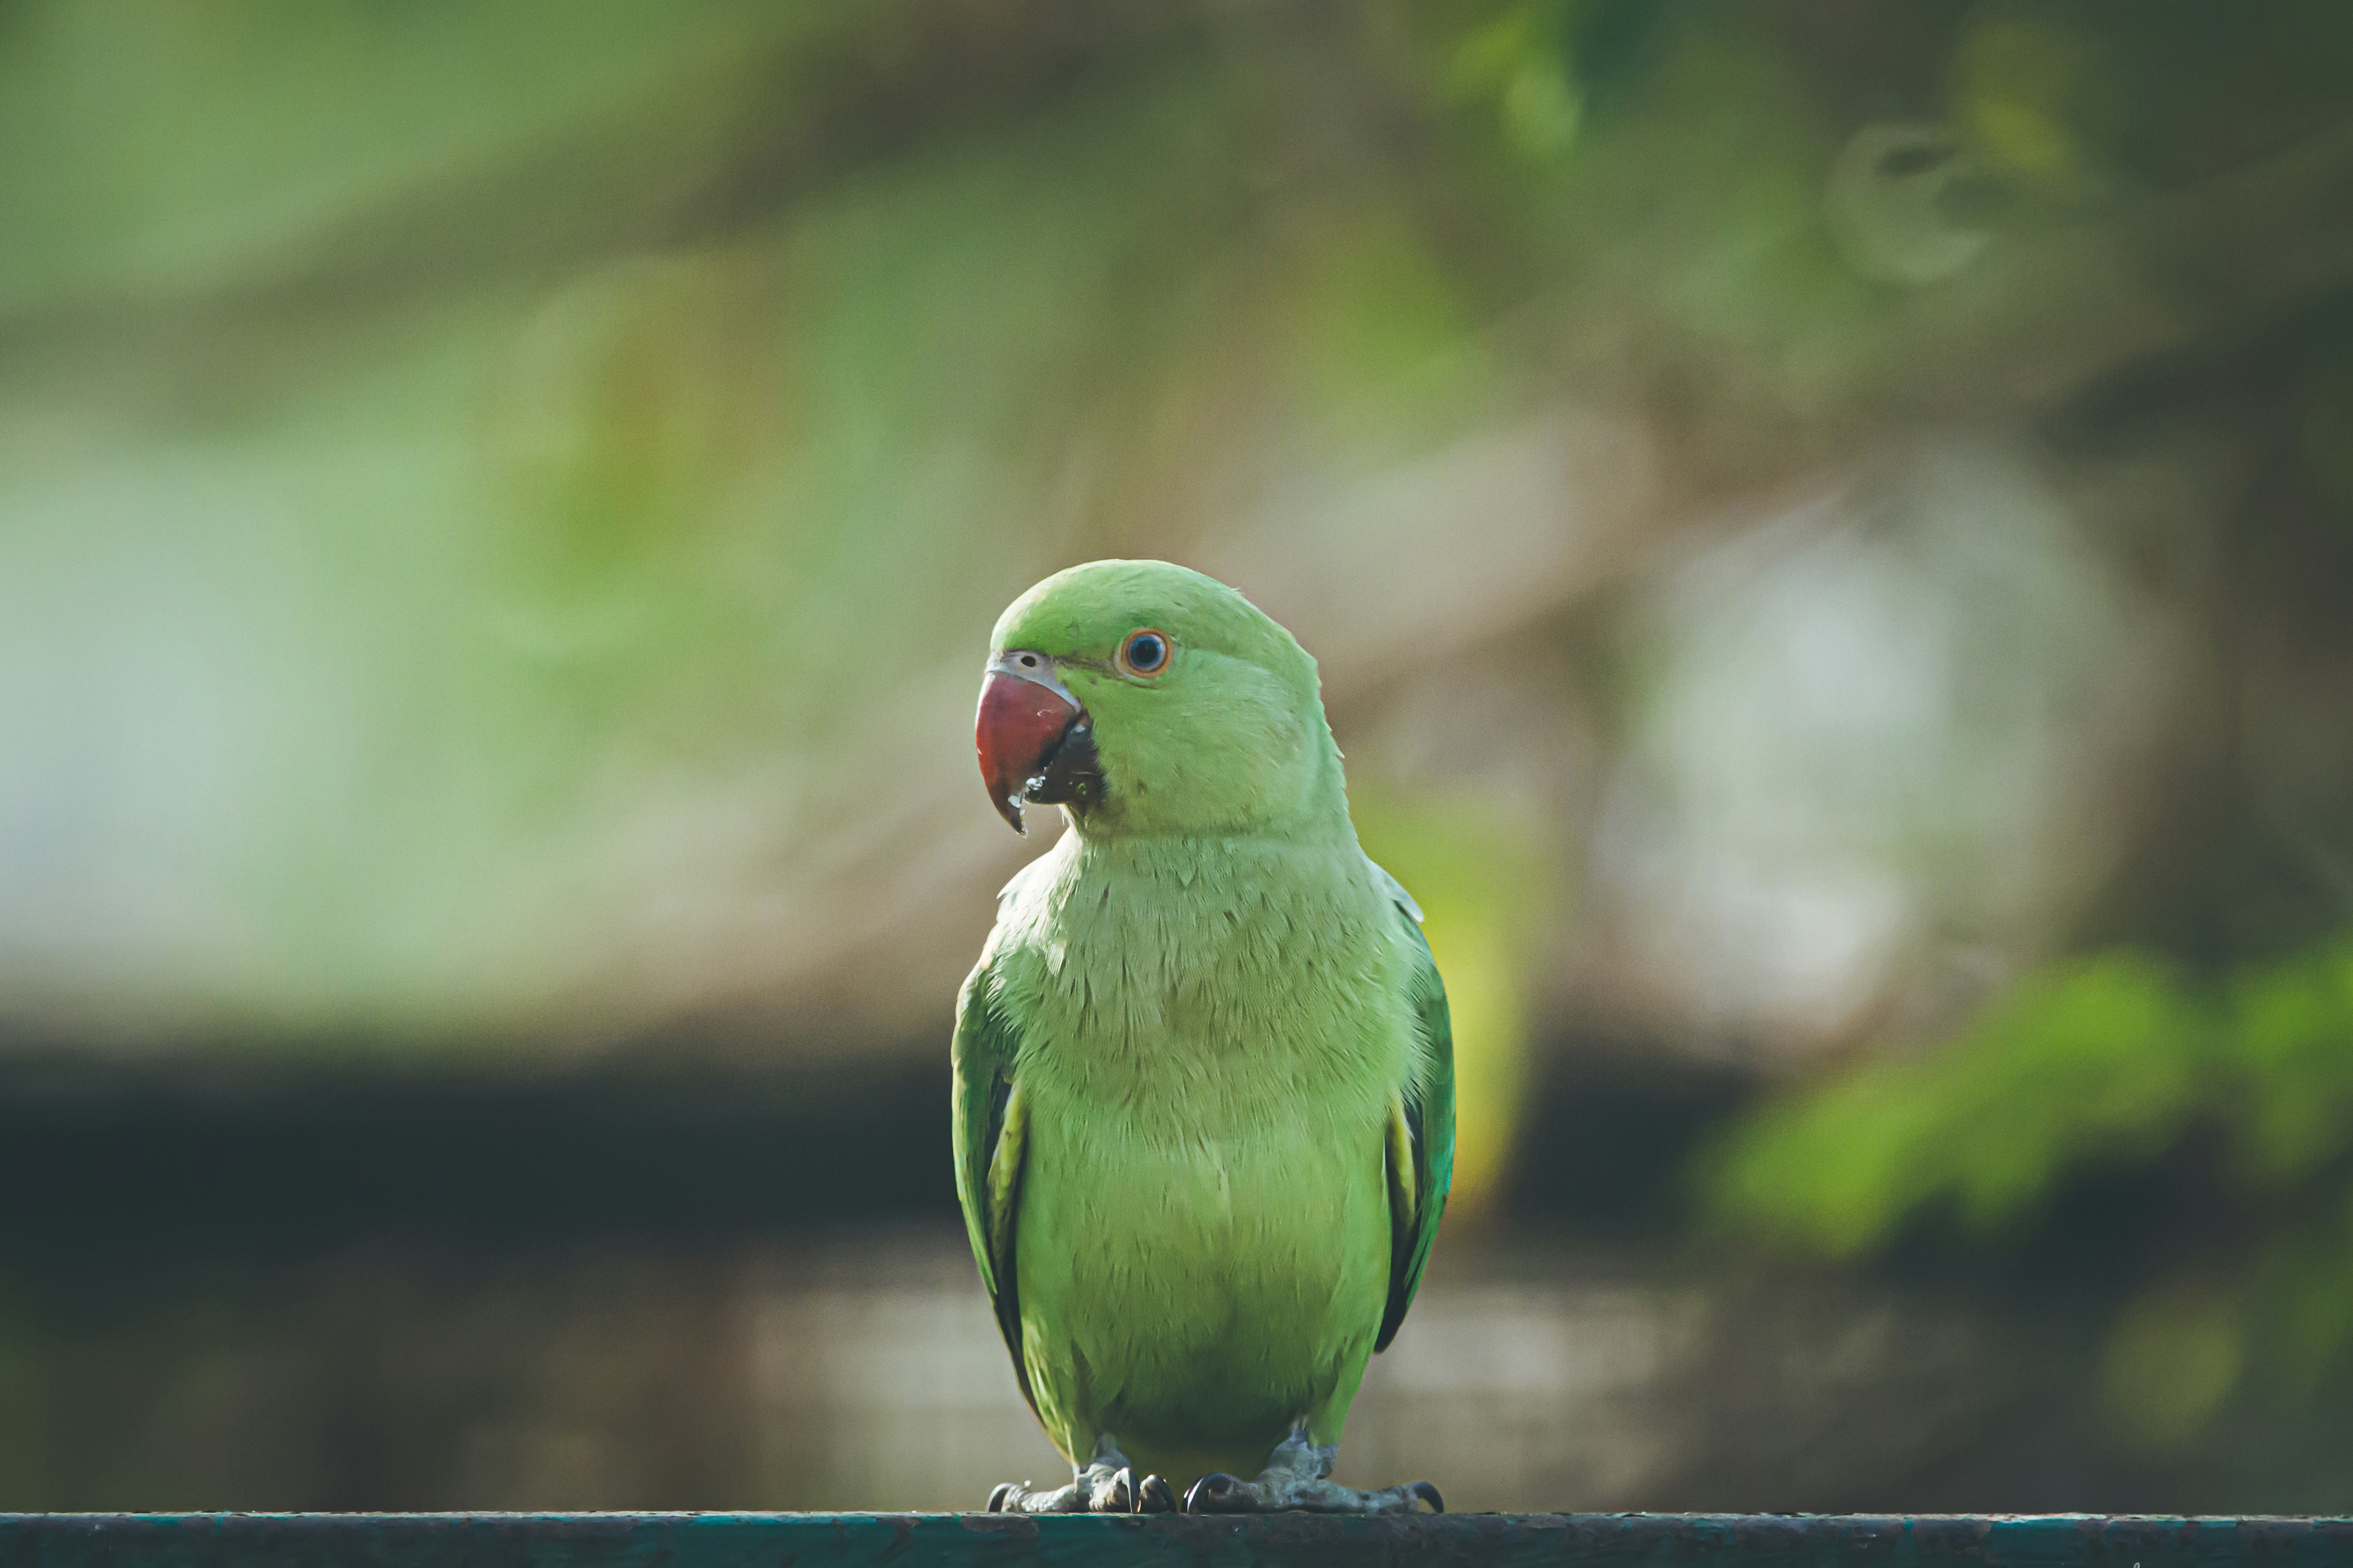 green bird in close-up photography